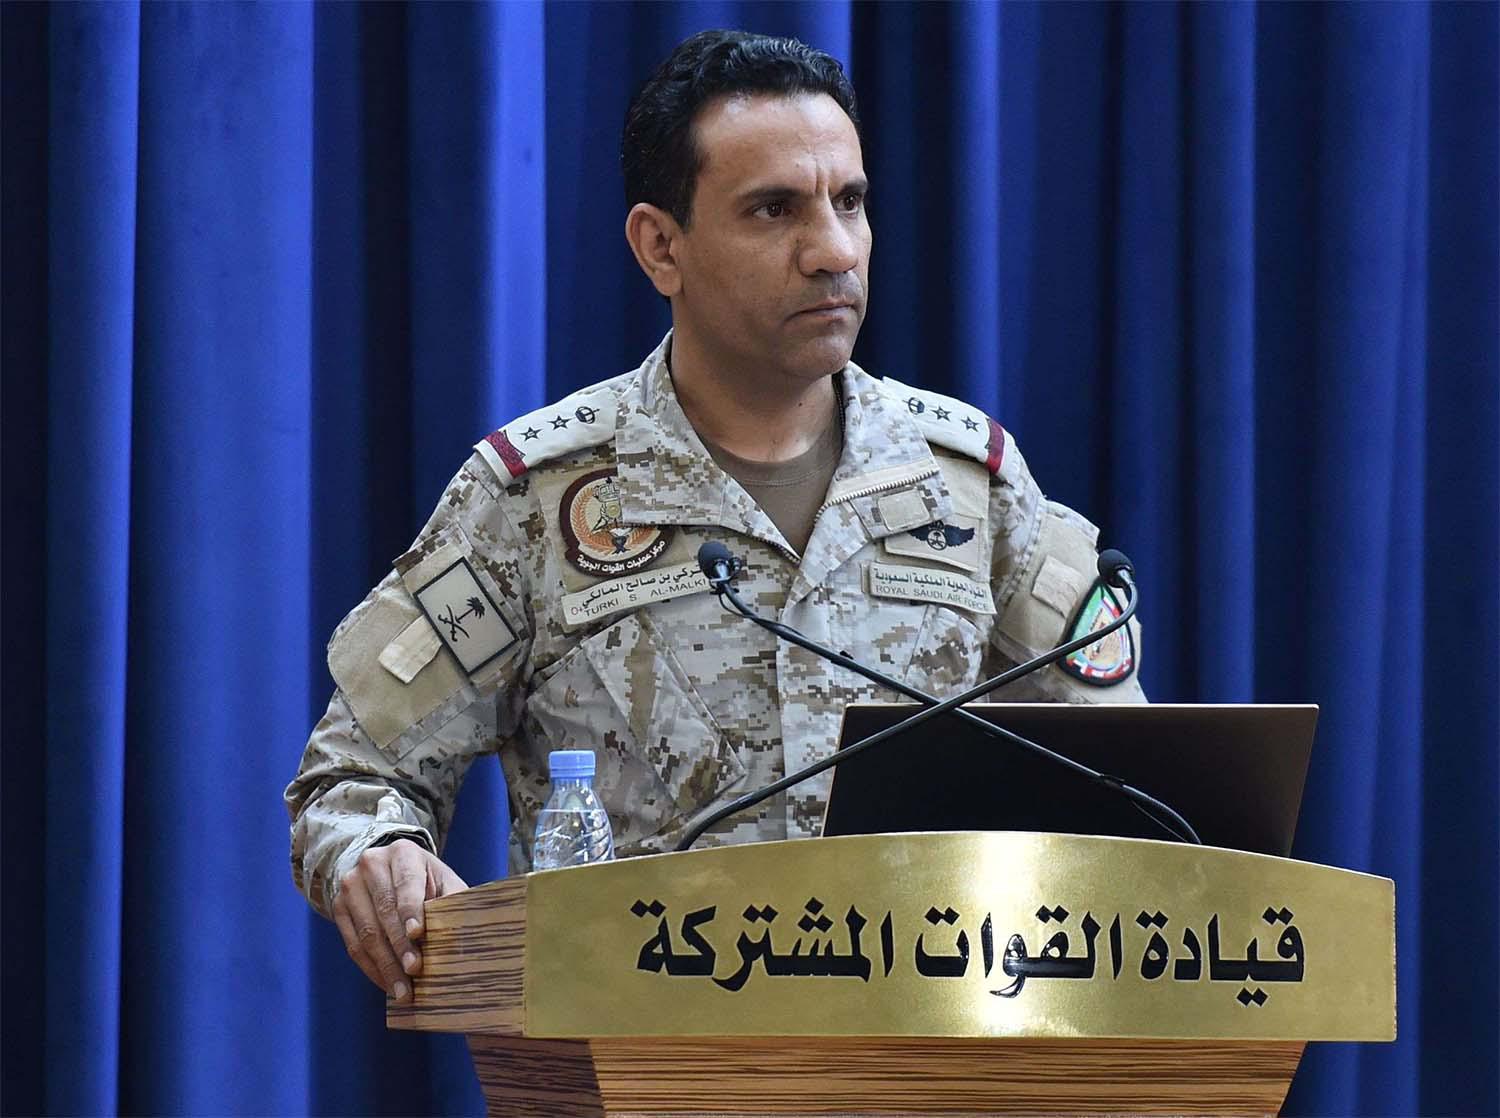 Maliki says no military operation has been carried out in the vicinity of Sanaa or any other Yemeni cities over the past period